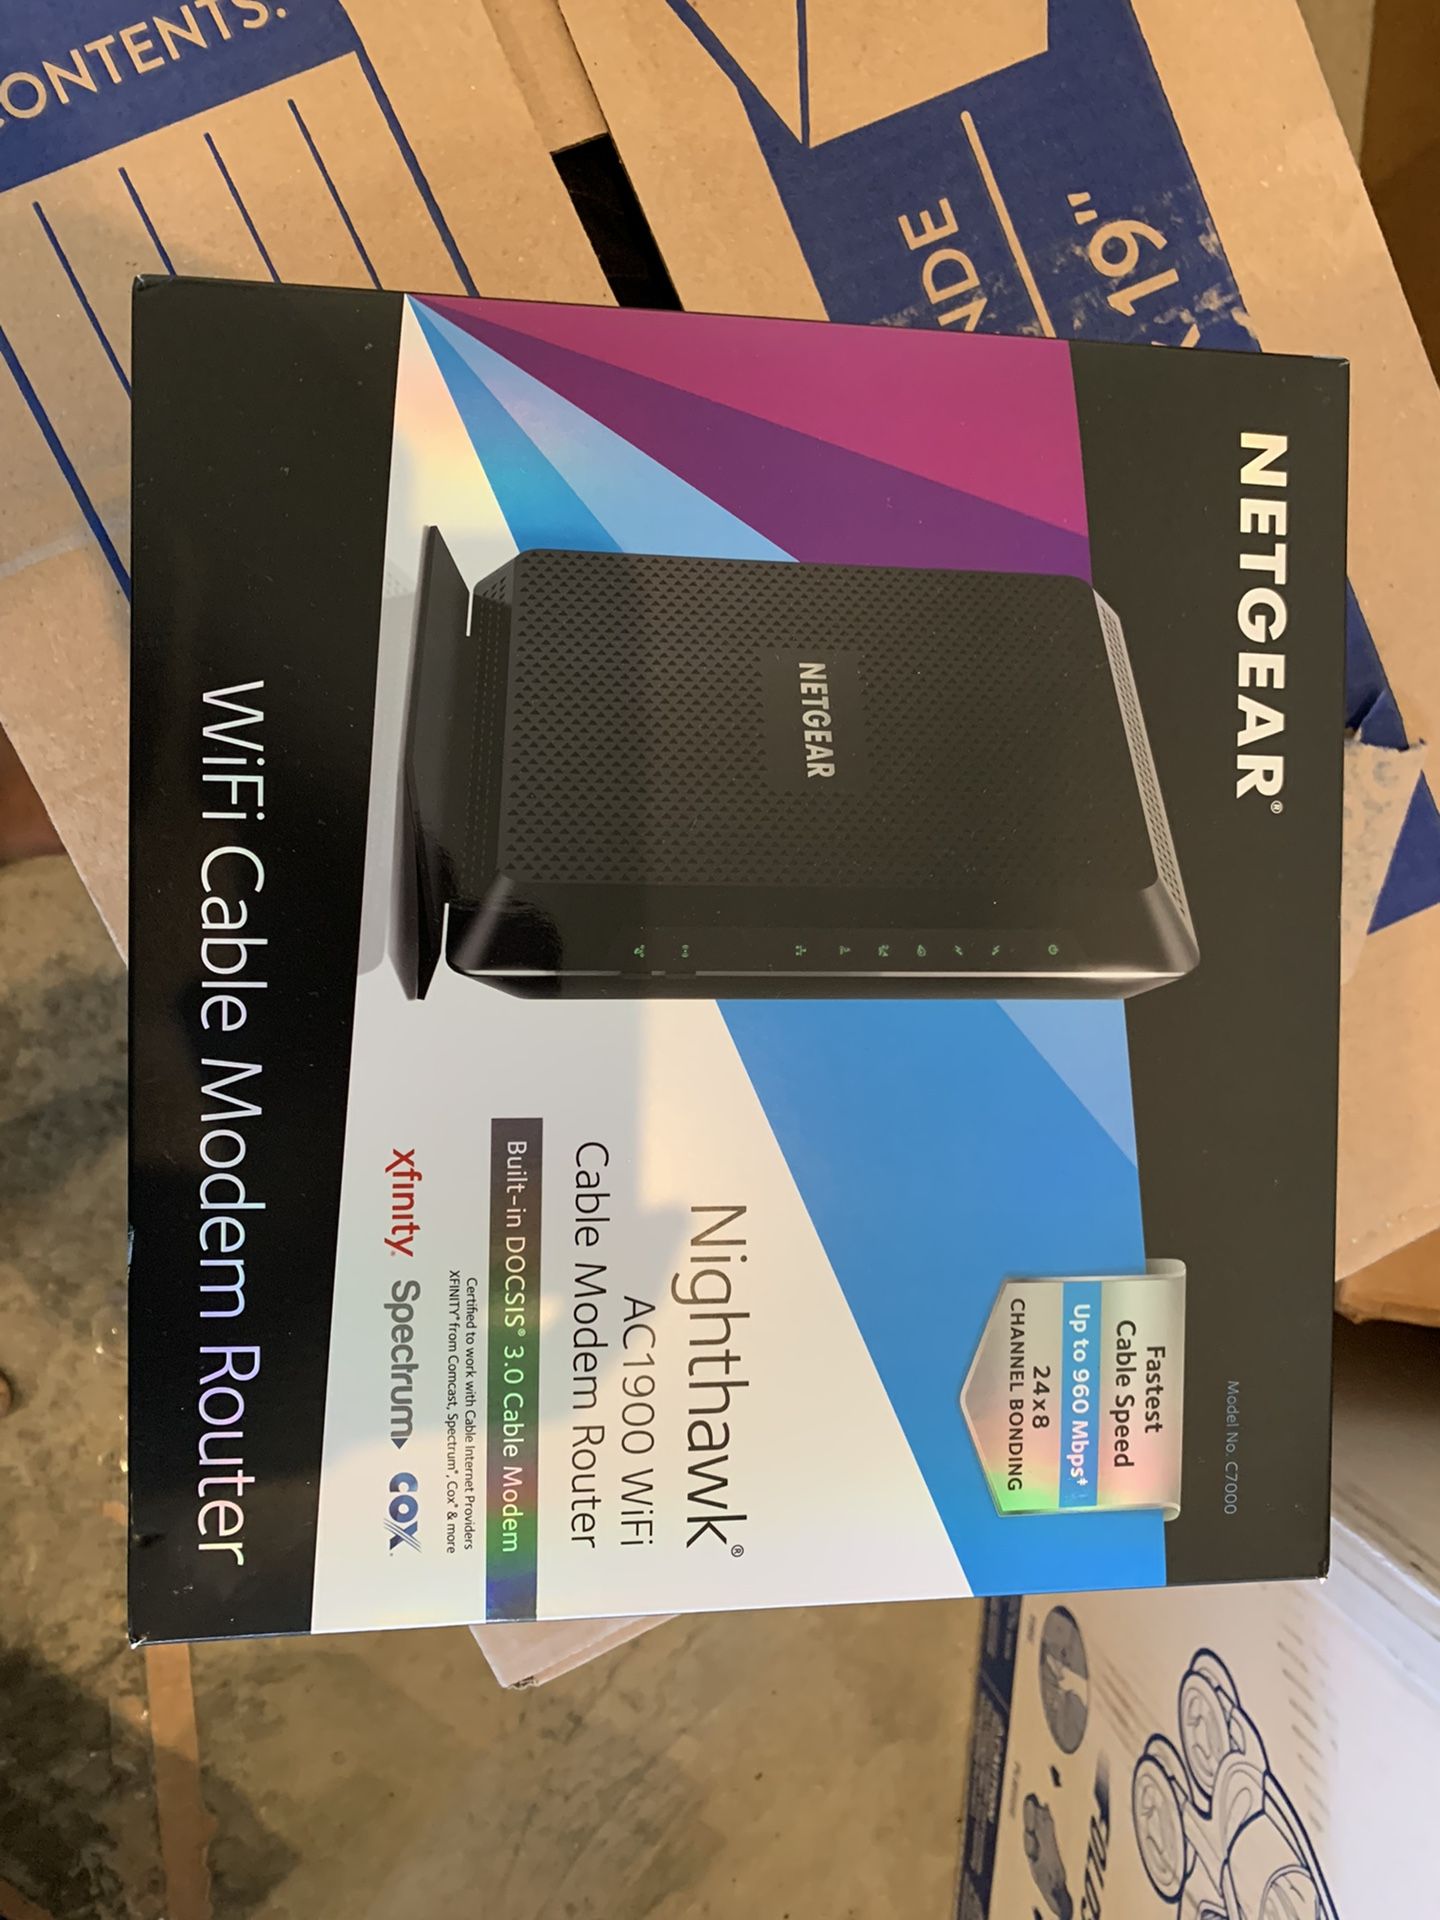 Netgear Nighthawk DOCSIS 3.0 2 In 1 Cable Modem + WiFi Router Upto 960 Mbps